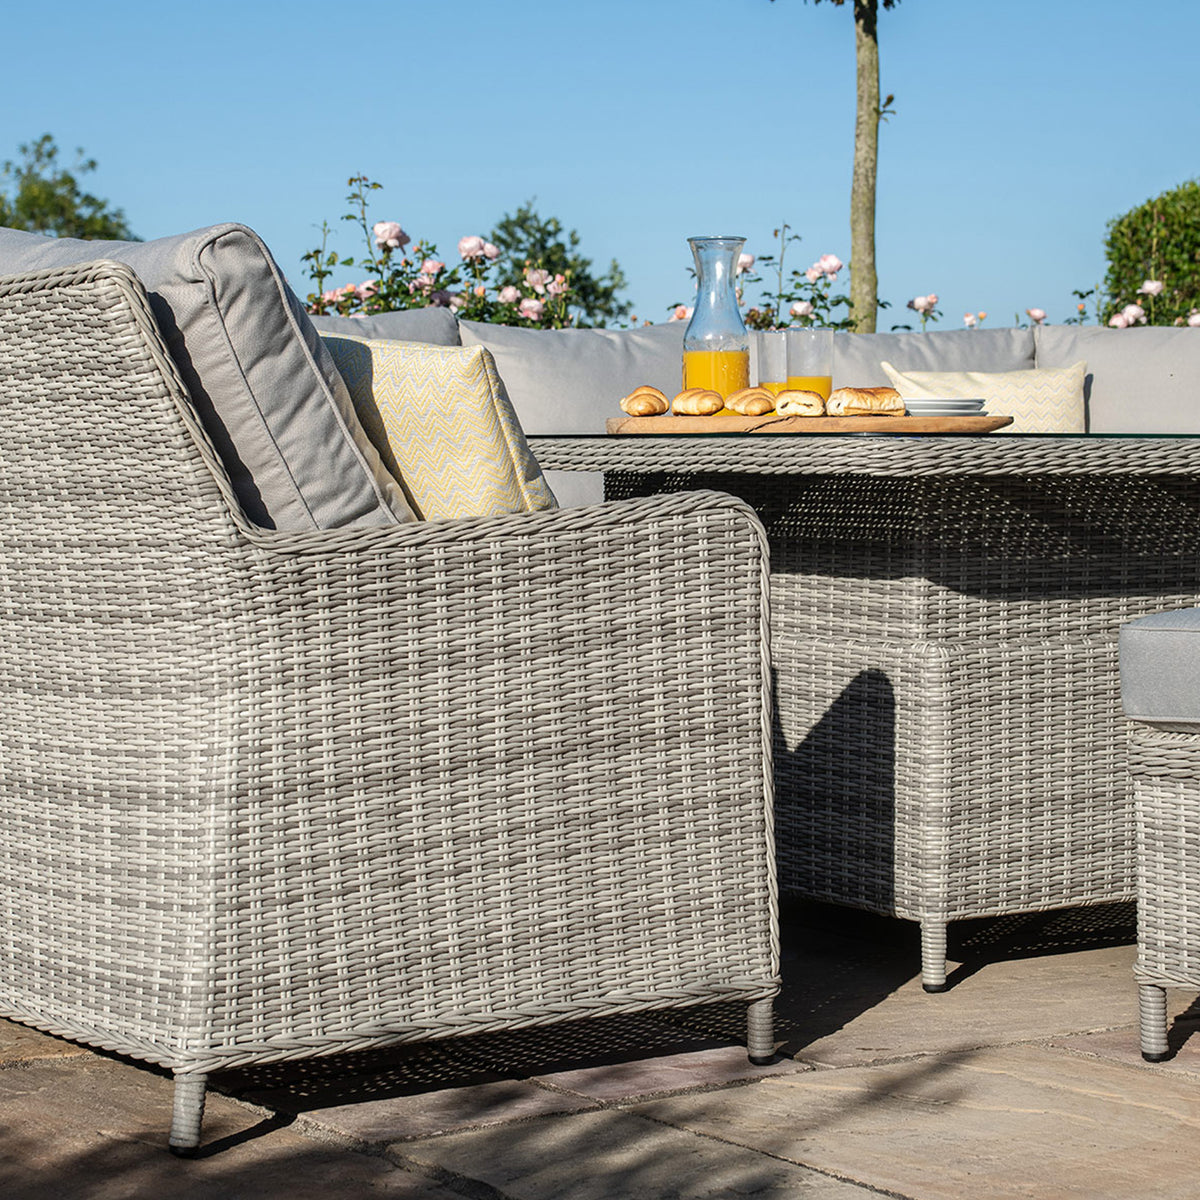 Maze Oxford Royal U-Shaped Outdoor Sofa Set with Rising Table from Roseland Furniture